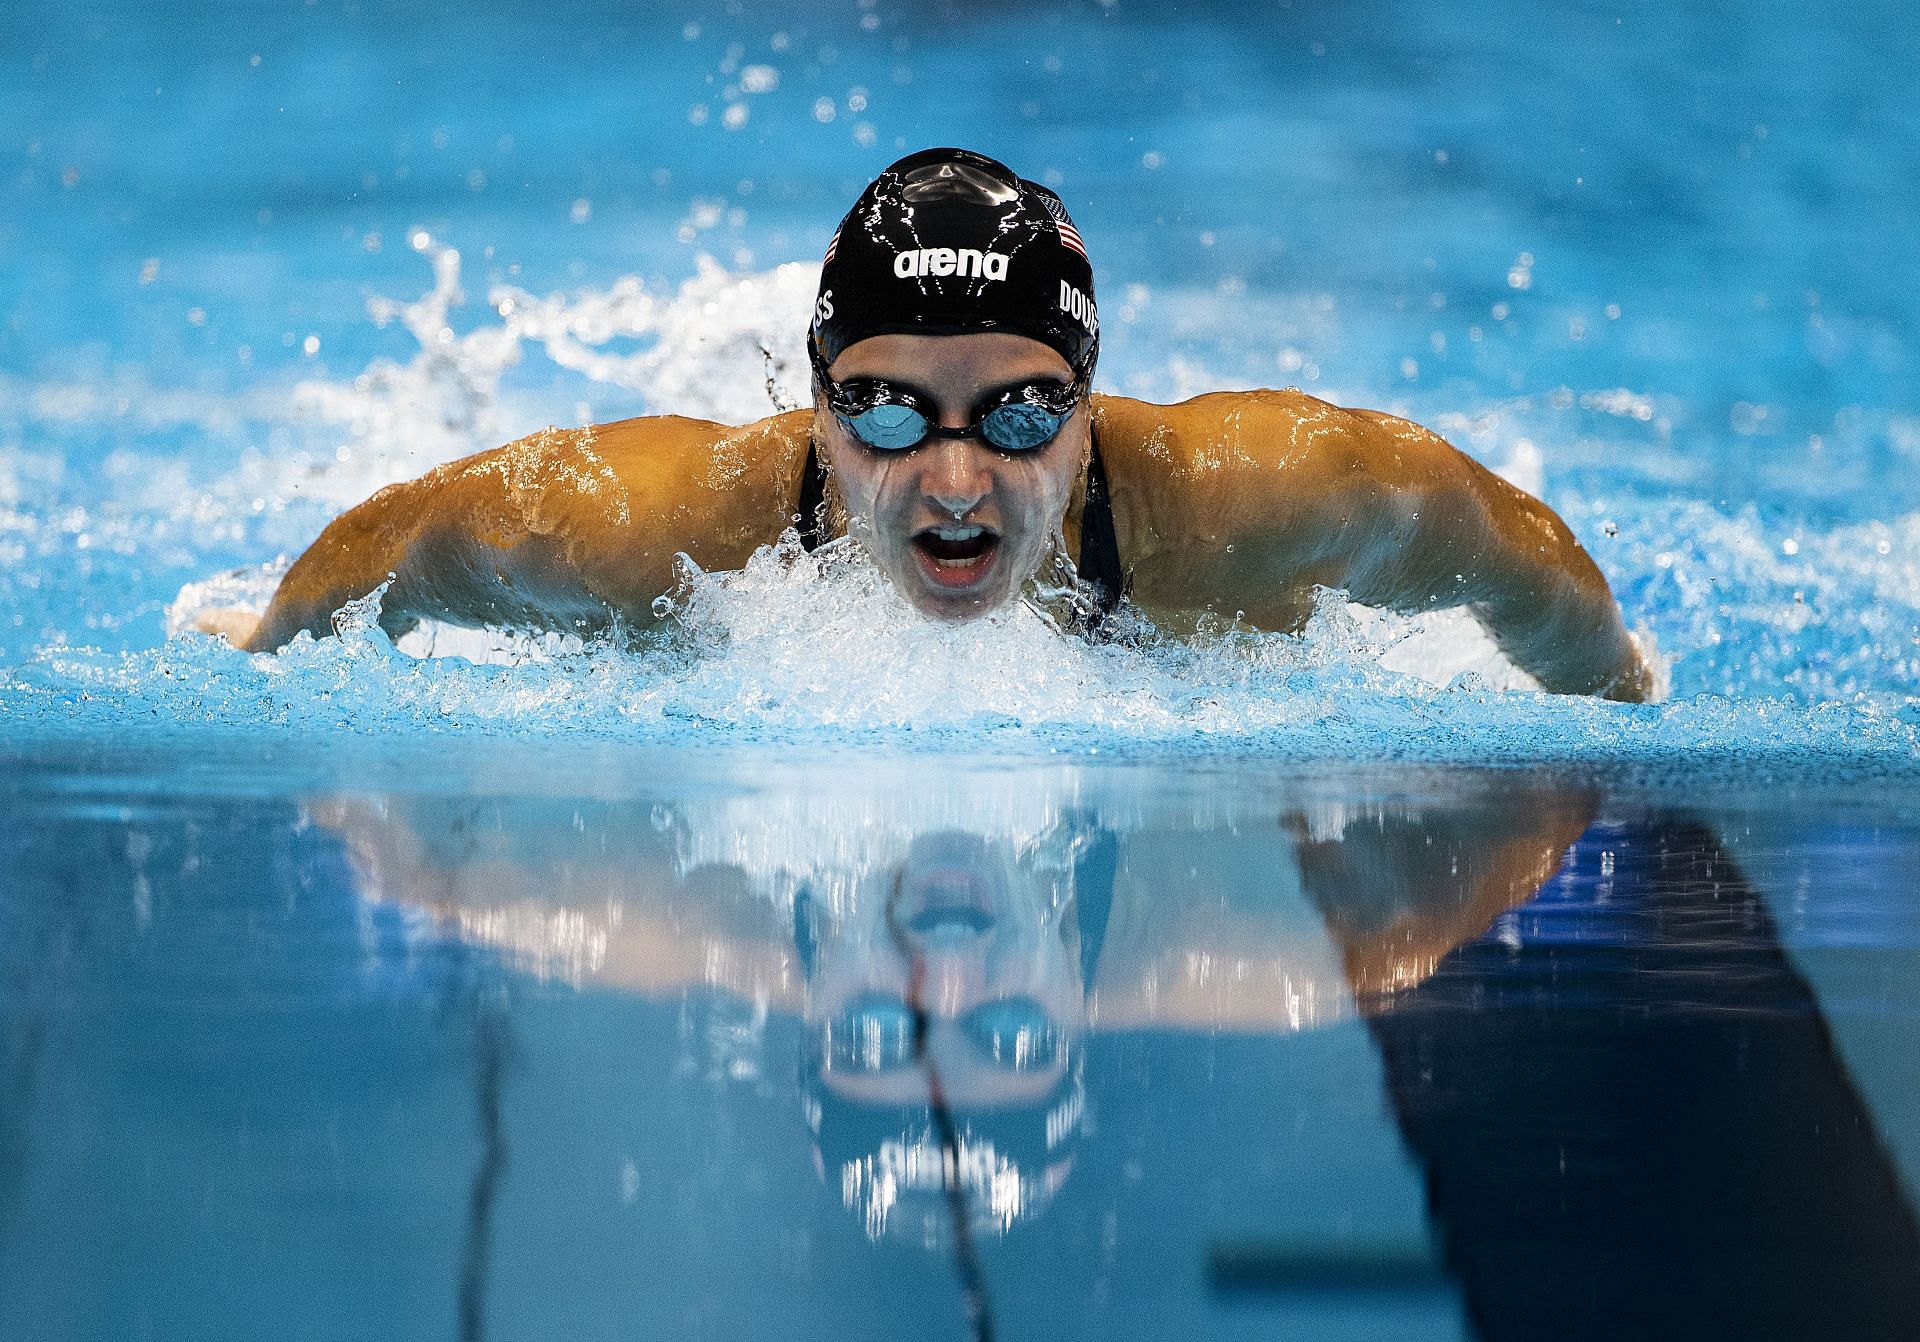 Kate Douglass at the Tokyo 2020 Olympic Games. (Photo by Al Bello/Getty Images)